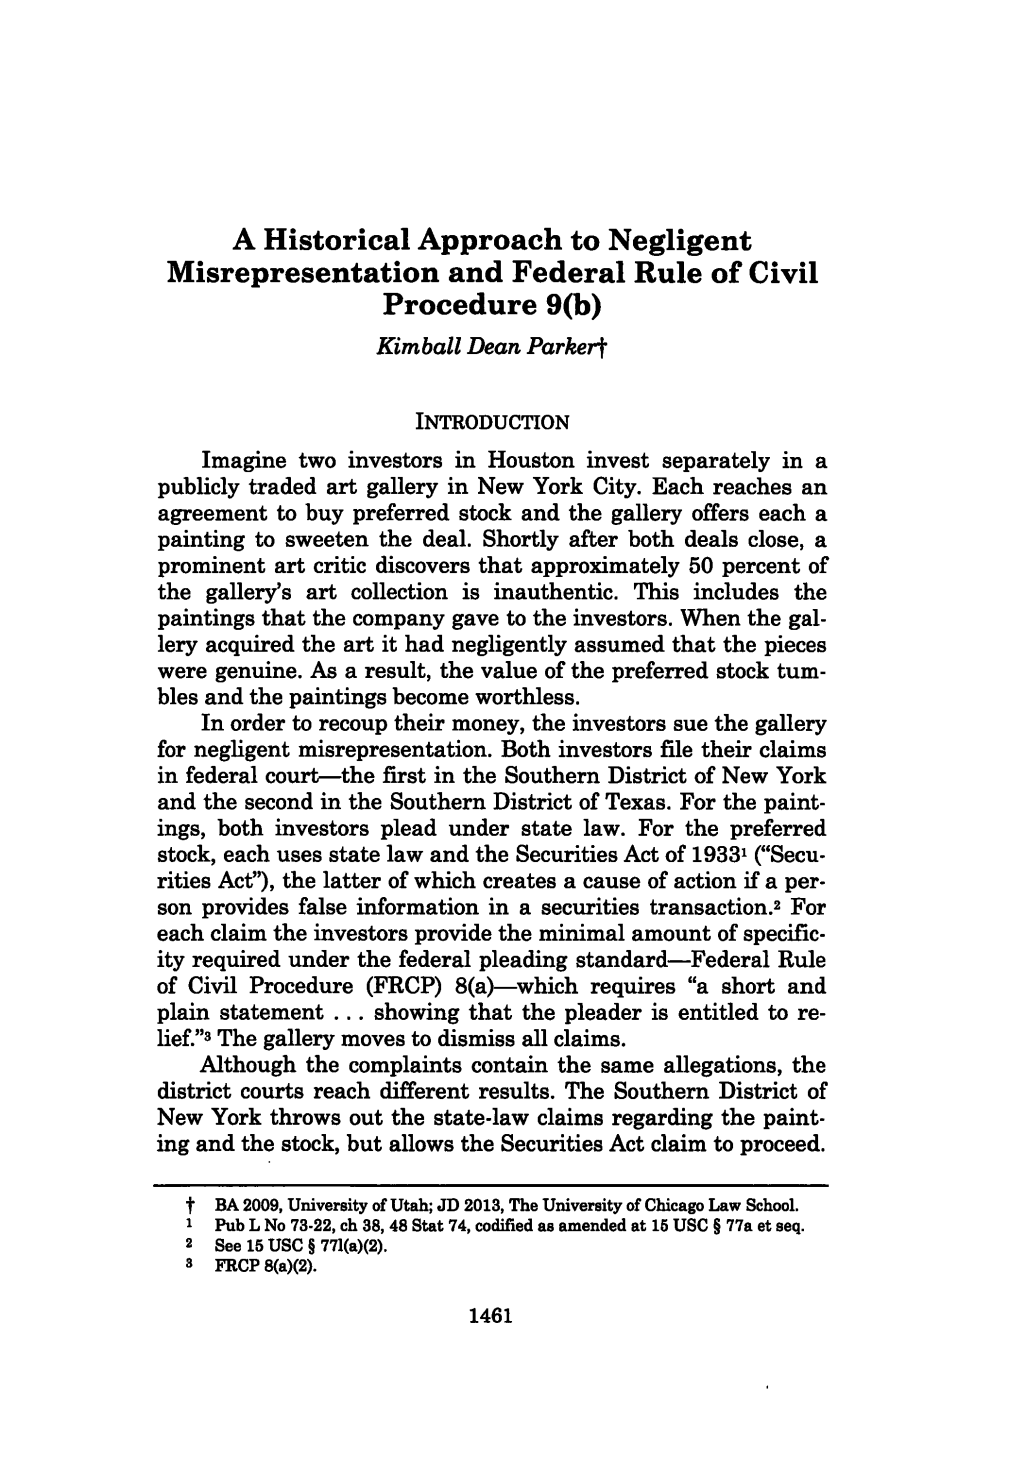 A Historical Approach to Negligent Misrepresentation and Federal Rule of Civil Procedure 9(B) Kimball Dean Parkert